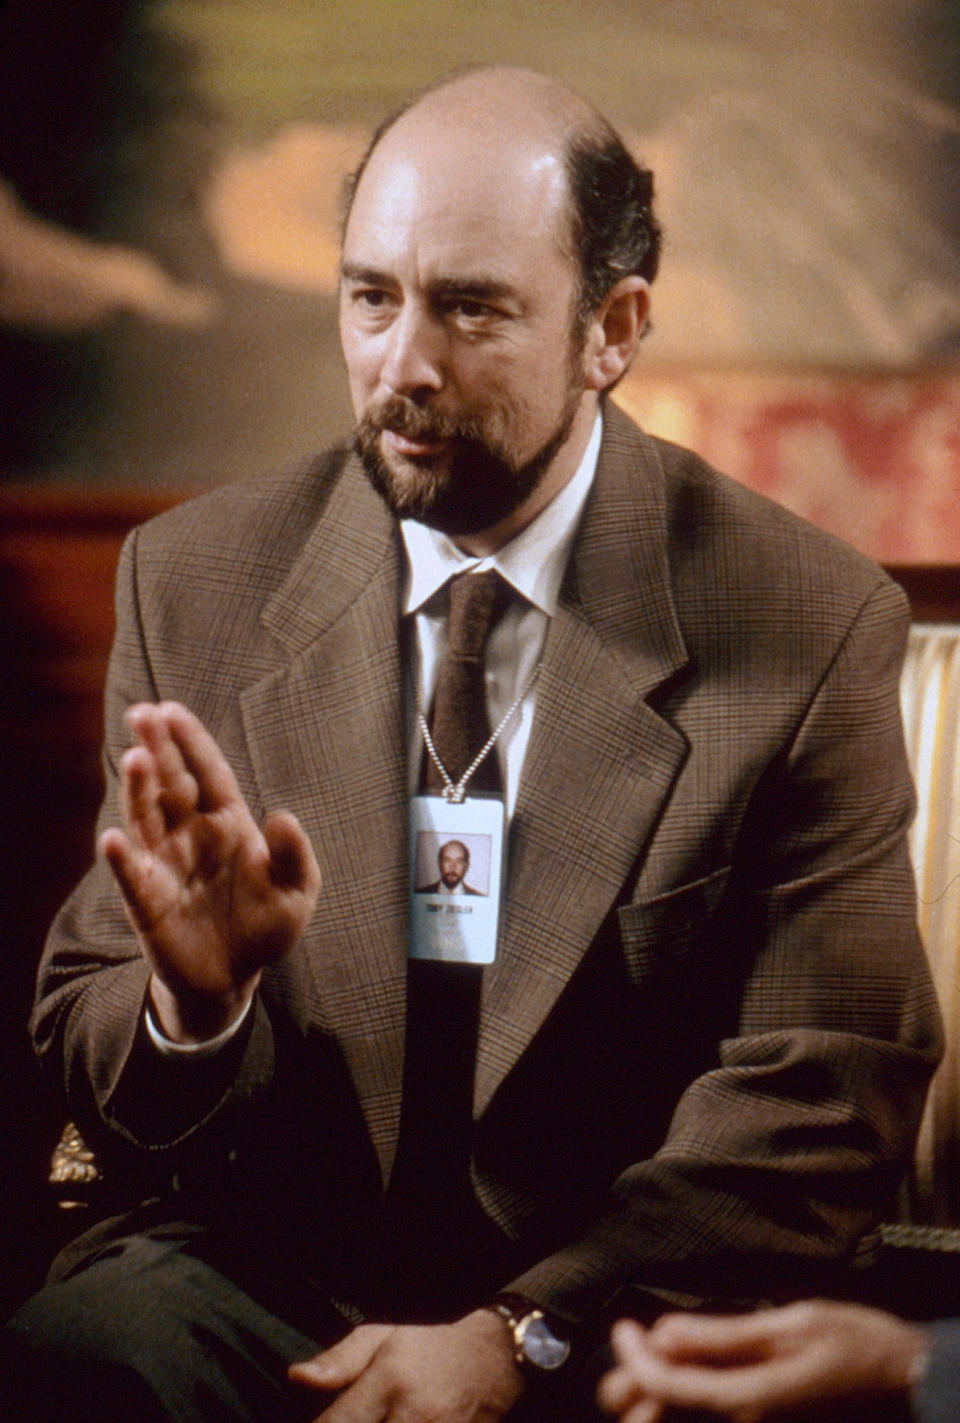 Schiff is best known for his role as Toby Ziegler on 